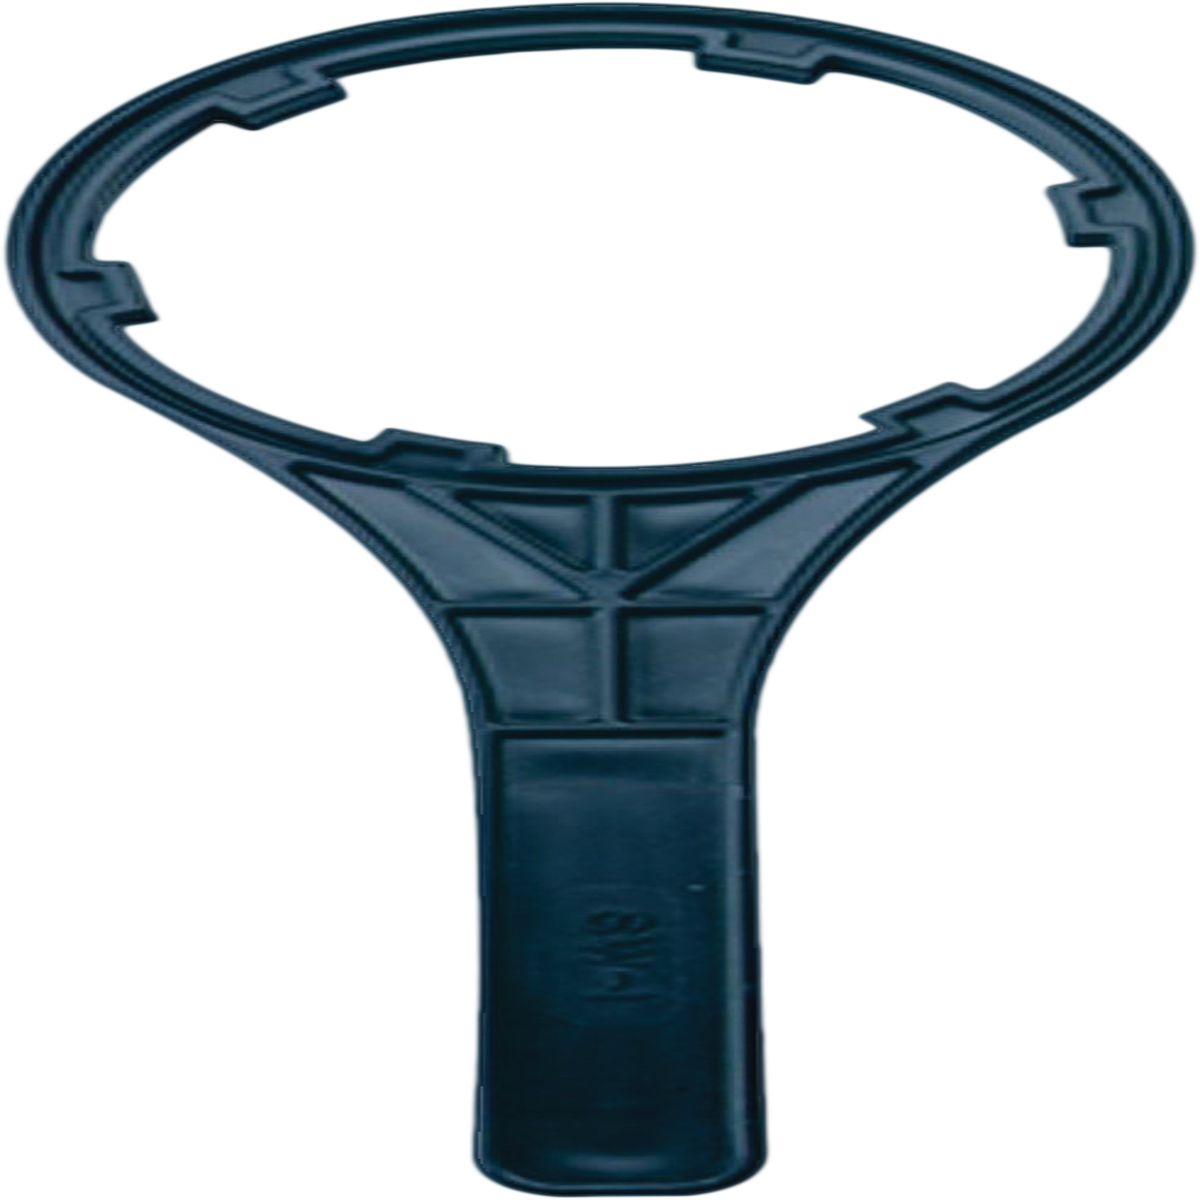 Water Filter Accessories & Tools